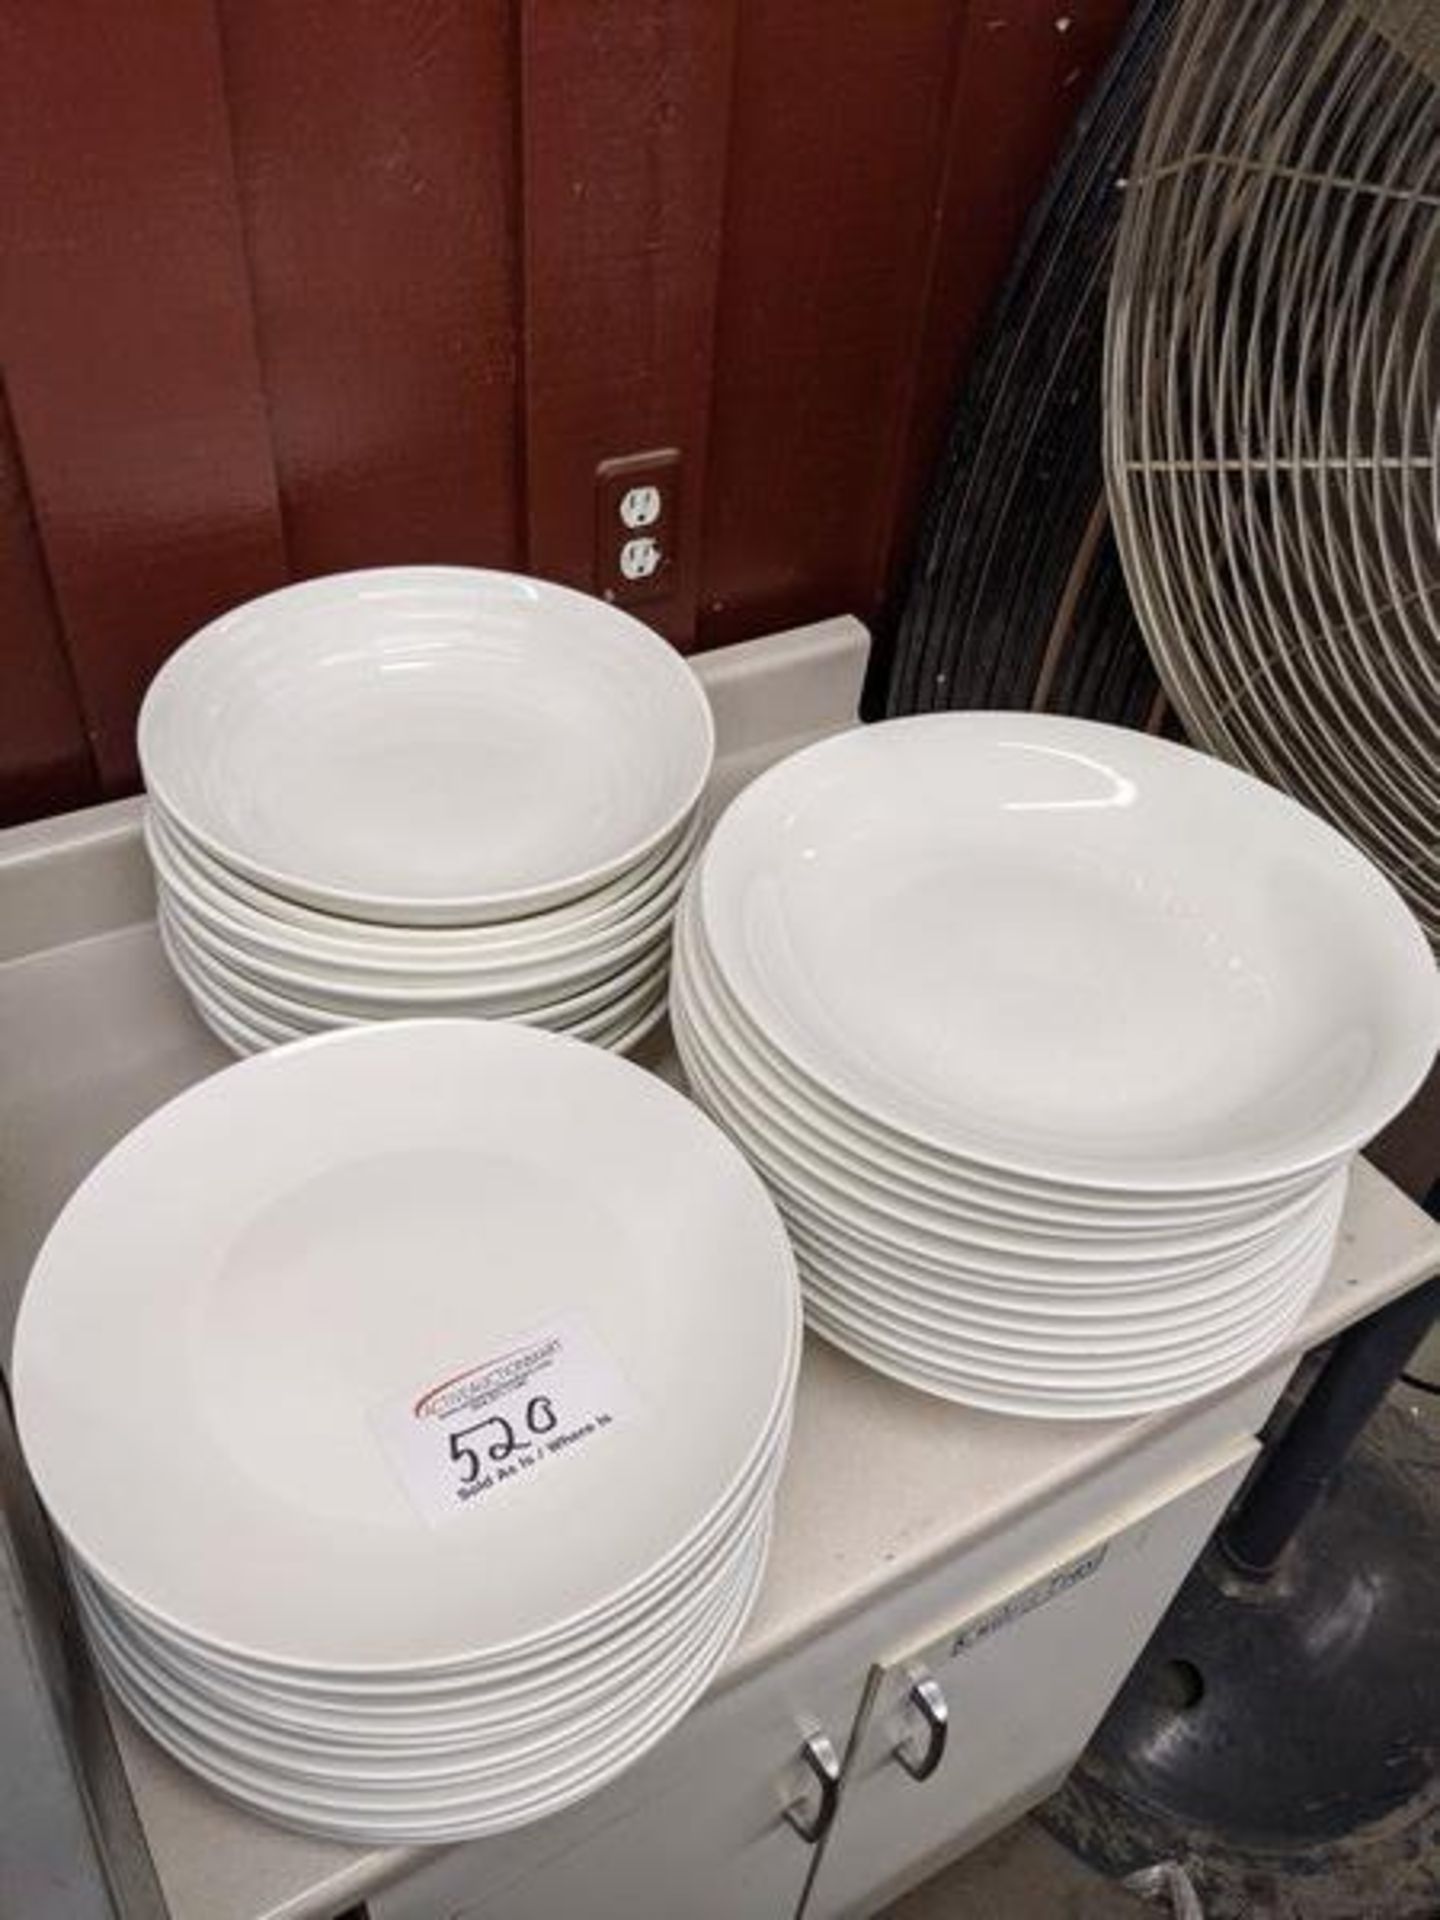 3 Stacks of Large Assorted White Dishes